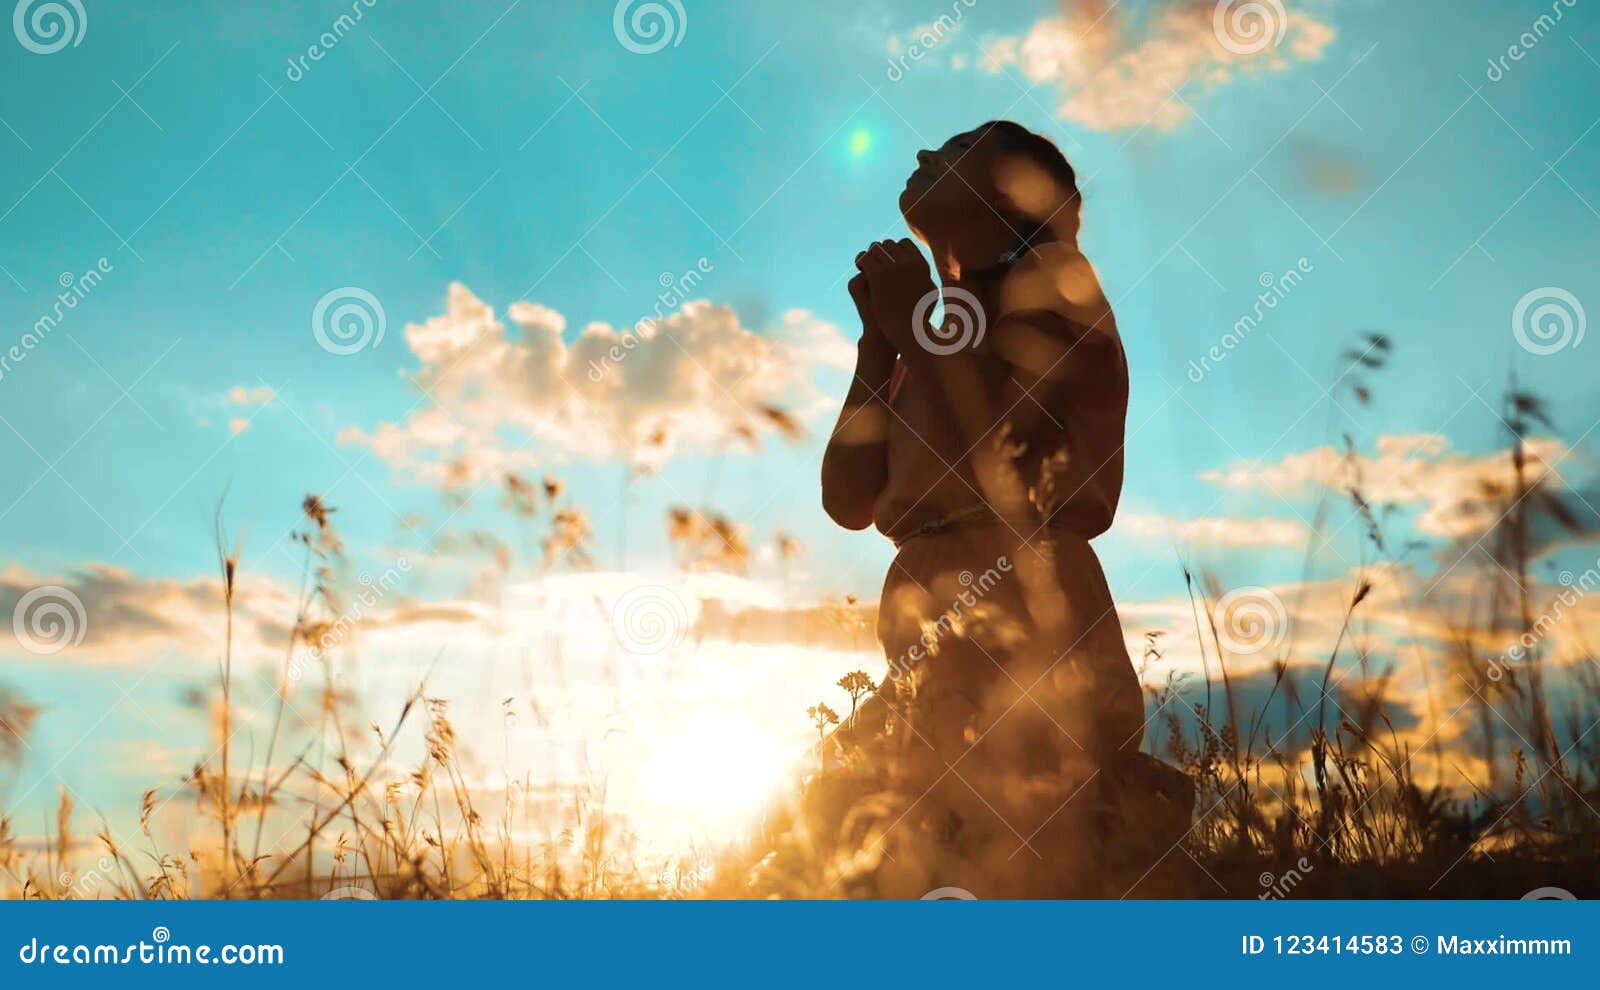 Girl Folded Her Hands In Prayer Silhouette At Sunset Woman Praying On 